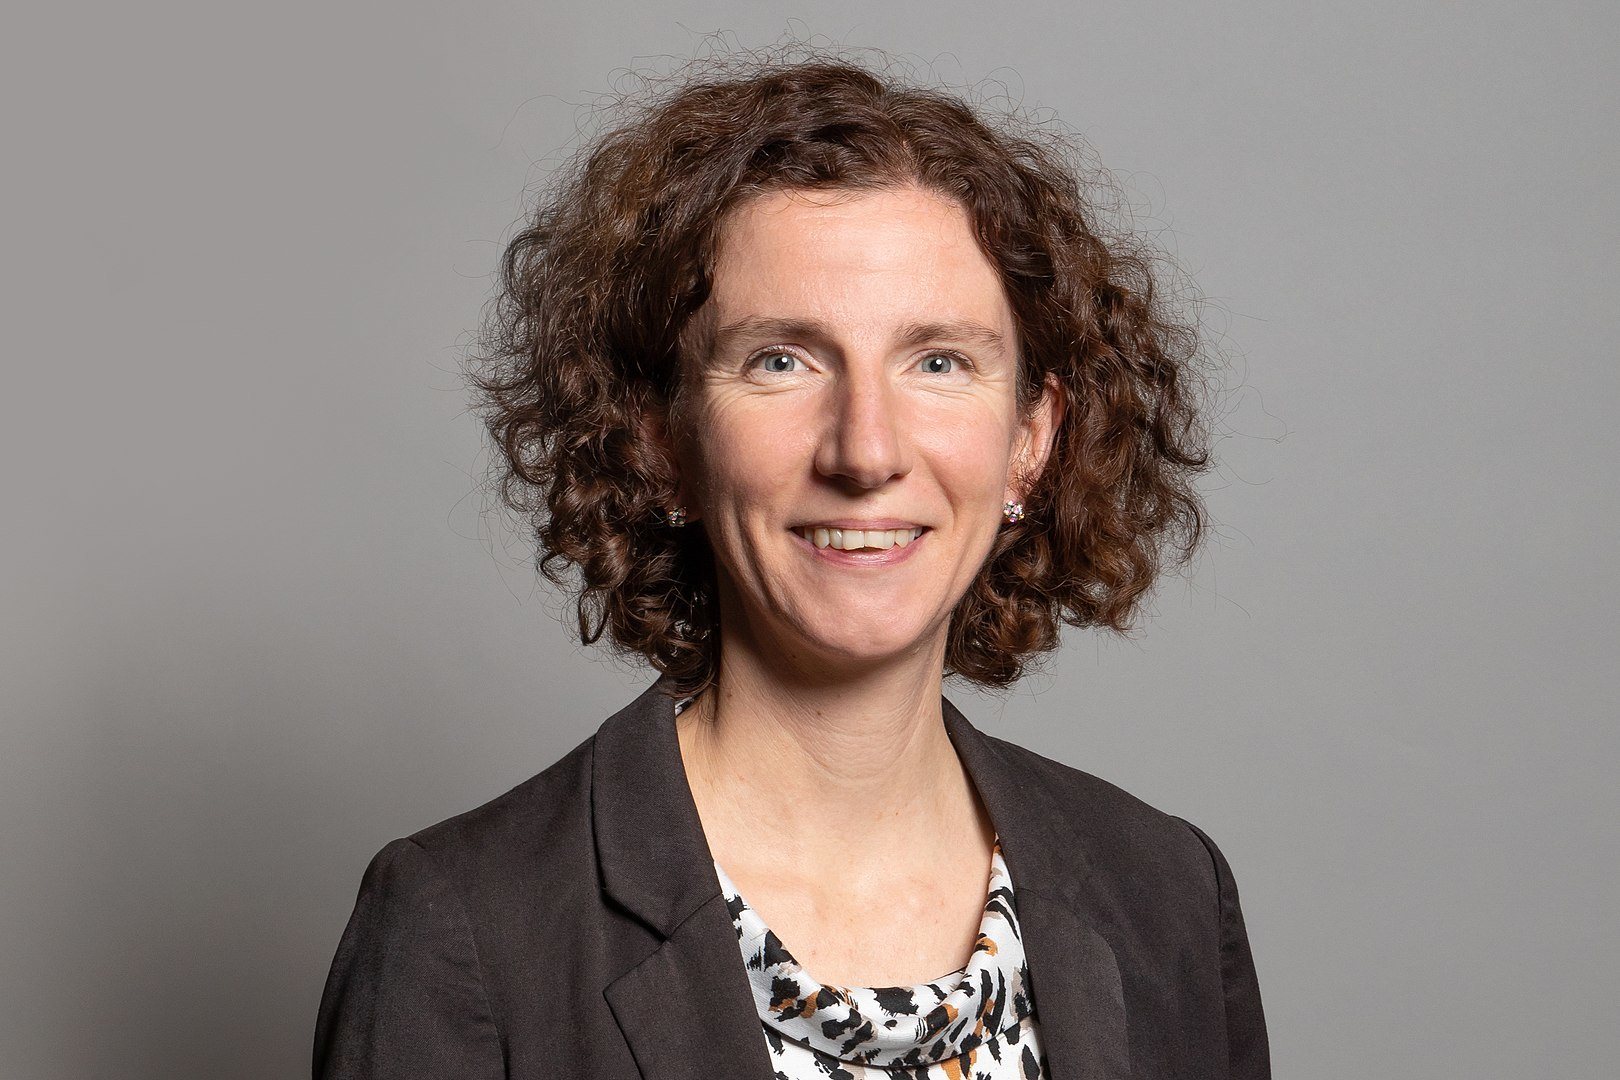 Anneliese Dodds said a Labour government would not implement the policy of self-ID for trans people.